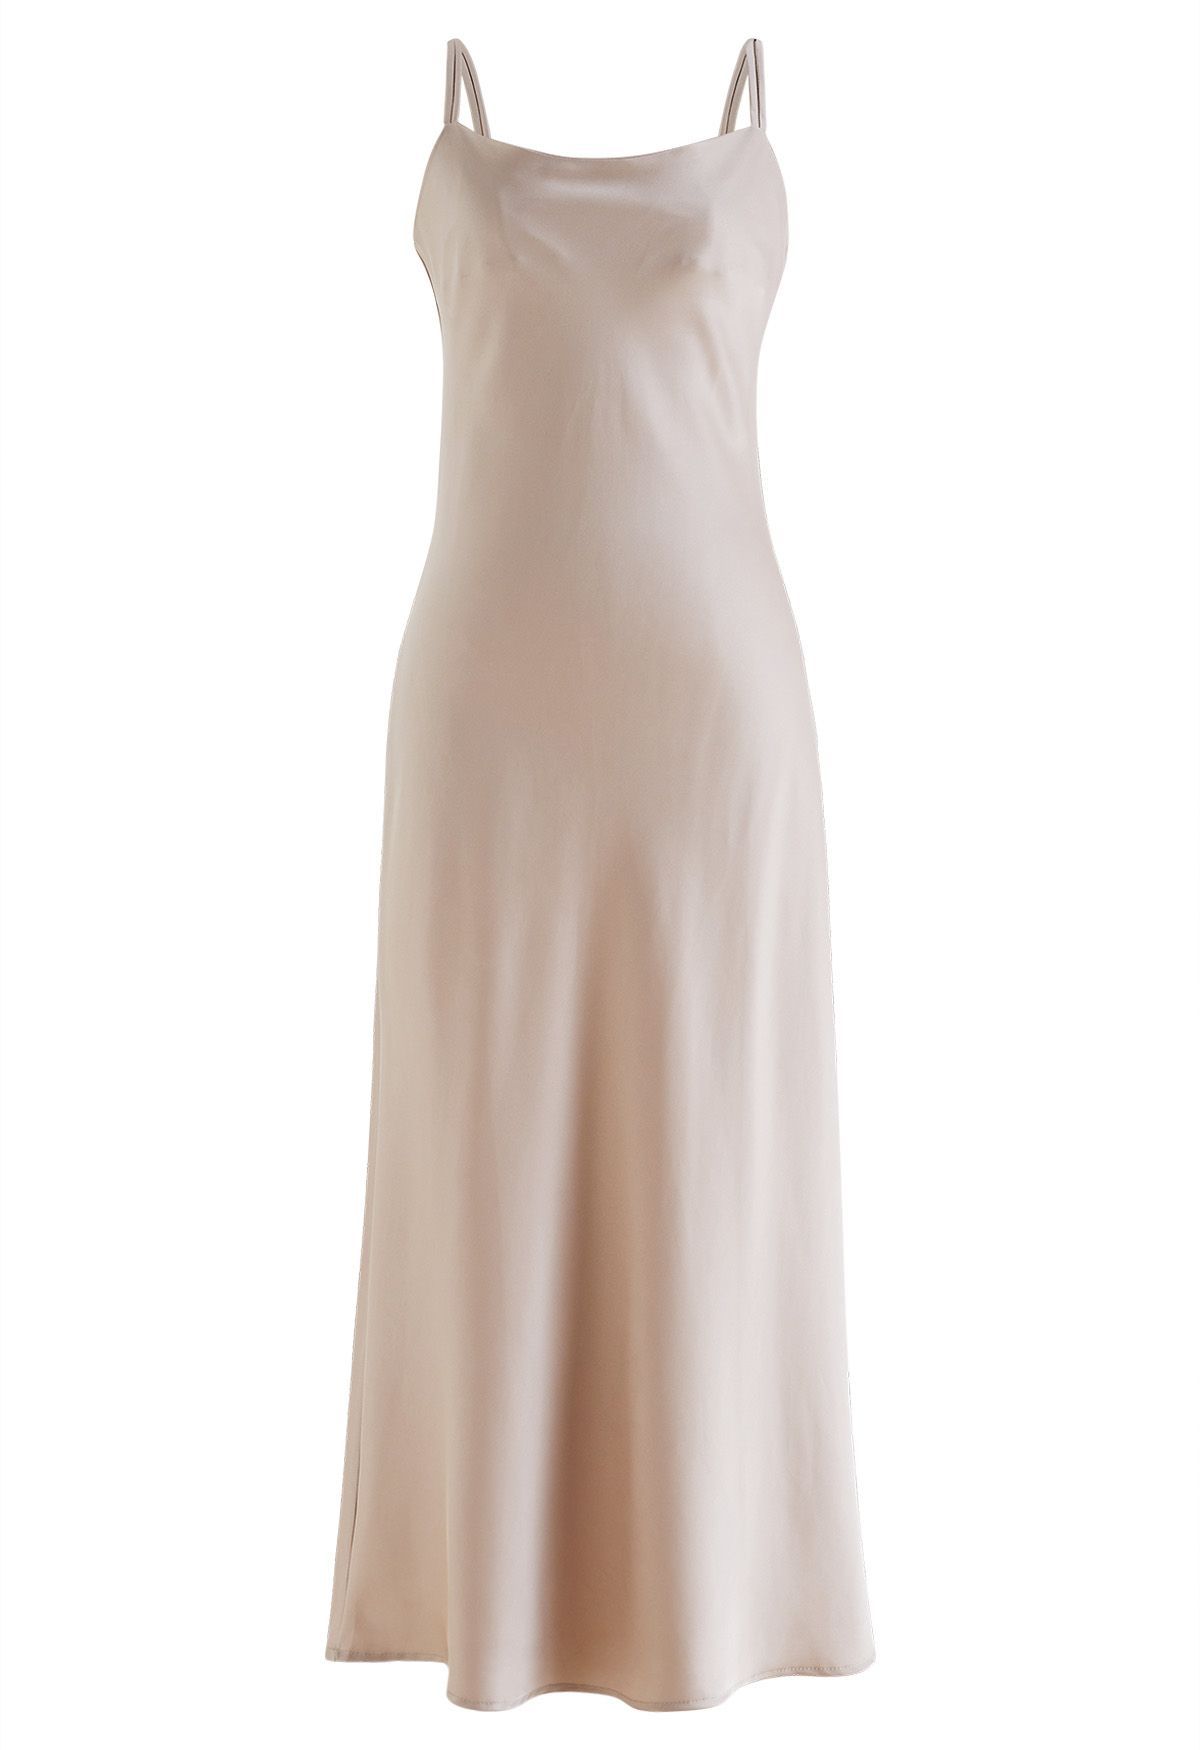 Double Straps Satin Cami Dress in Champagne | Chicwish